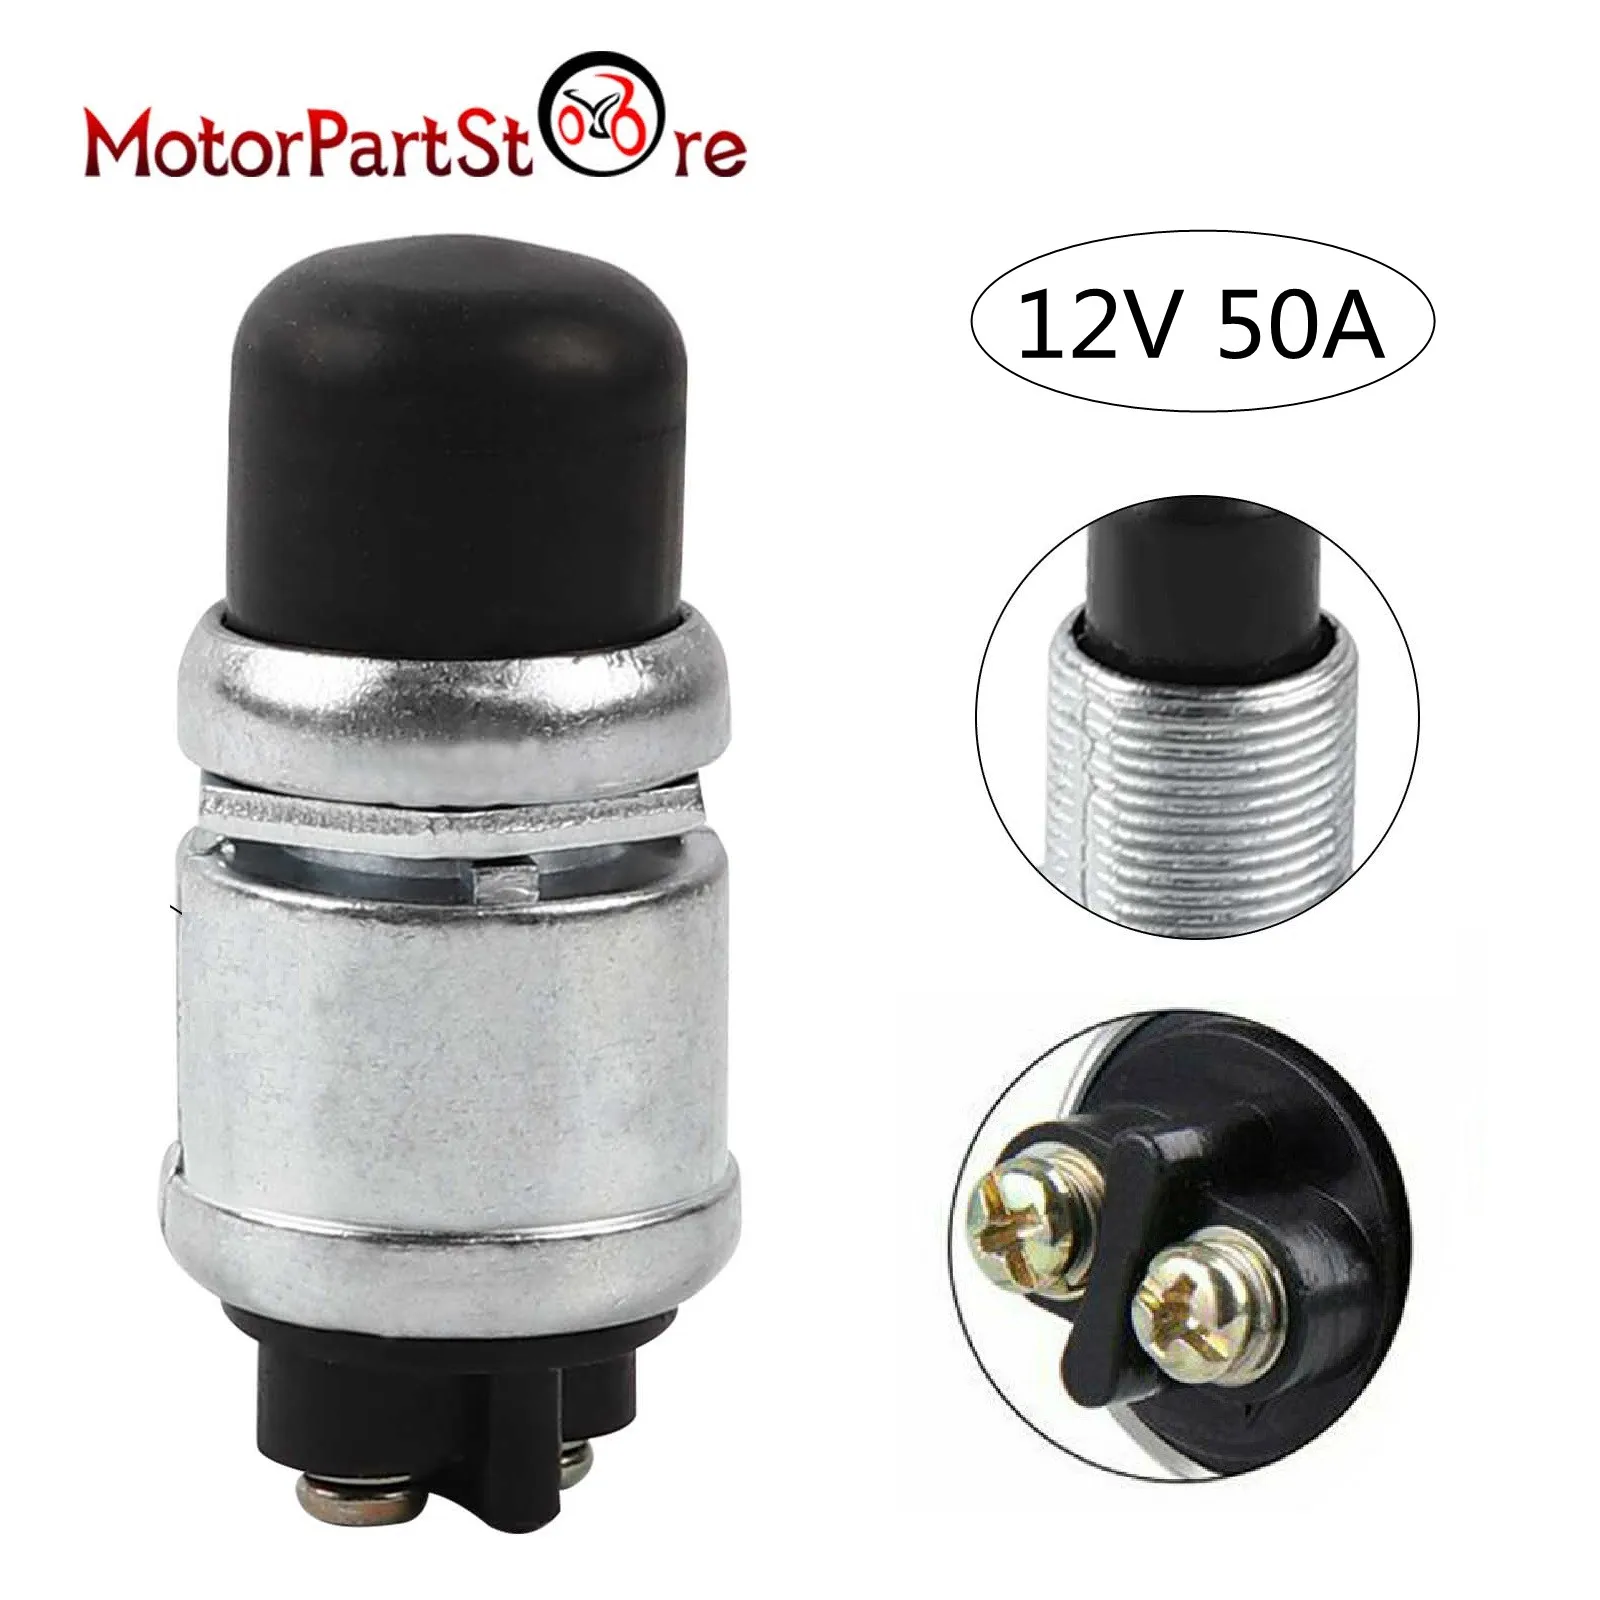 Waterproof 50A 12V DC Push Button Momentary Starter Ignition Switch For Cars 